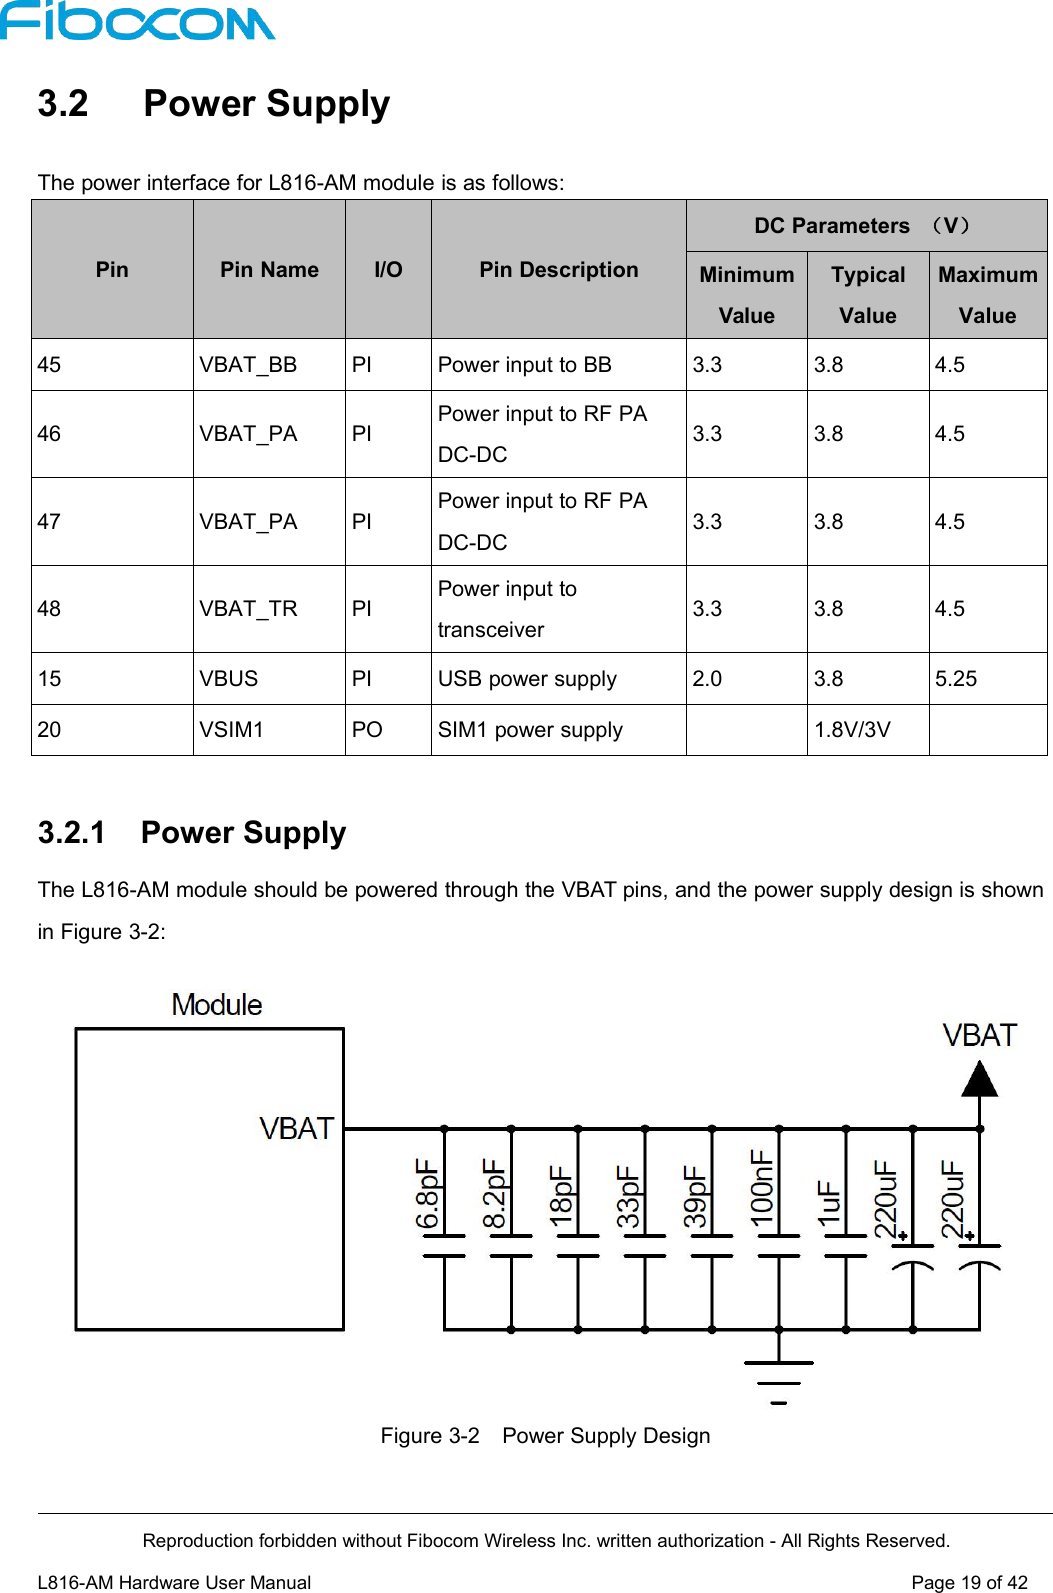 Reproduction forbidden without Fibocom Wireless Inc. written authorization - All Rights Reserved.L816-AM Hardware User Manual Page19of423.2 Power SupplyThe power interface for L816-AM module is as follows:PinPin NameI/OPin DescriptionDC Parameters （V）MinimumValueTypicalValueMaximumValue45VBAT_BBPIPower input to BB3.33.84.546VBAT_PAPIPower input to RF PADC-DC3.33.84.547VBAT_PAPIPower input to RF PADC-DC3.33.84.548VBAT_TRPIPower input totransceiver3.33.84.515VBUSPIUSB power supply2.03.85.2520VSIM1POSIM1 power supply1.8V/3V3.2.1 Power SupplyThe L816-AM module should be powered through the VBAT pins, and the power supply design is shownin Figure 3-2:Figure 3-2 Power Supply Design